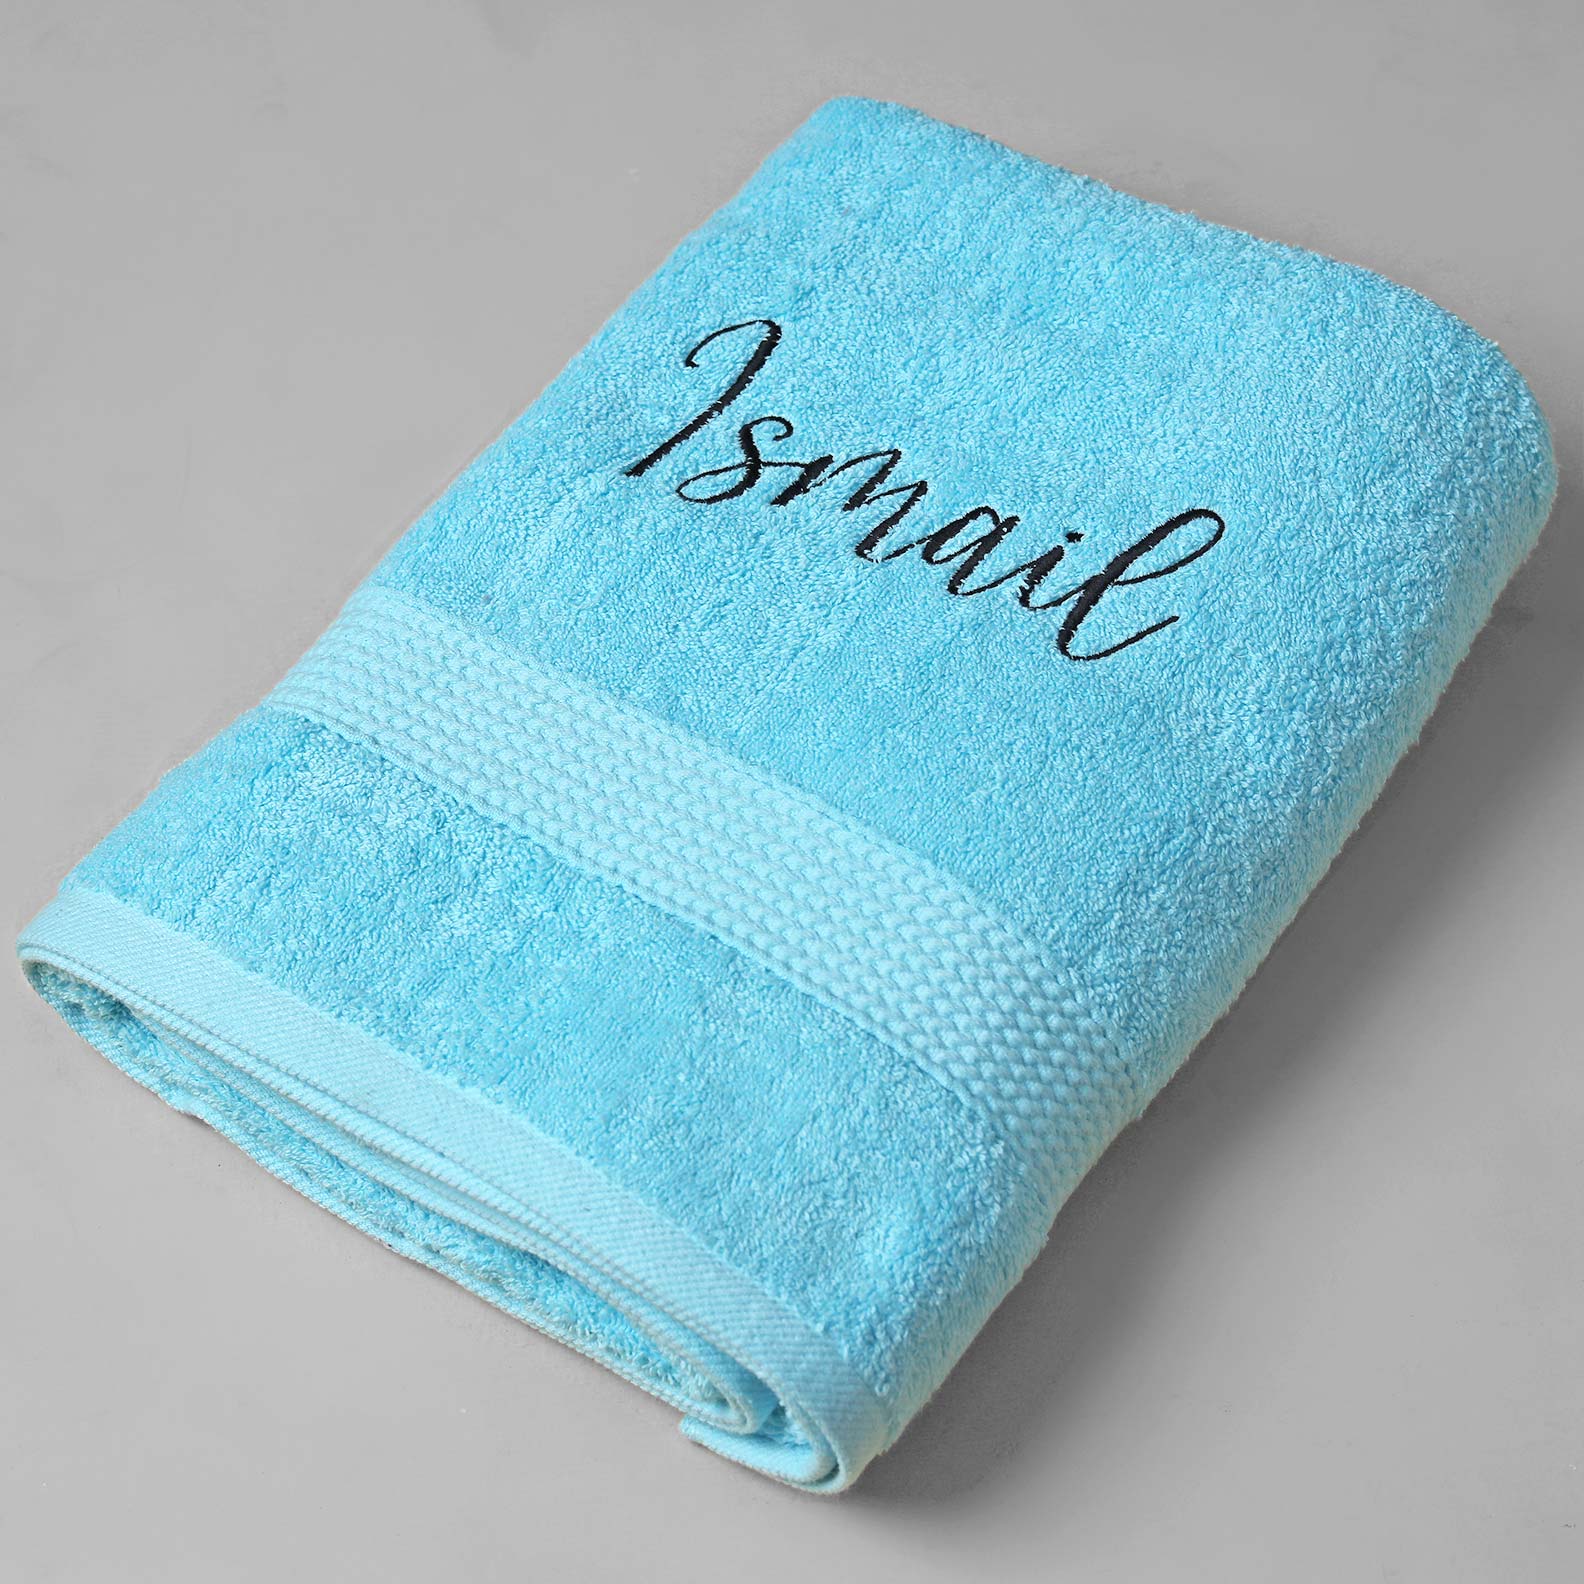 Customized Embroidered Name Towel